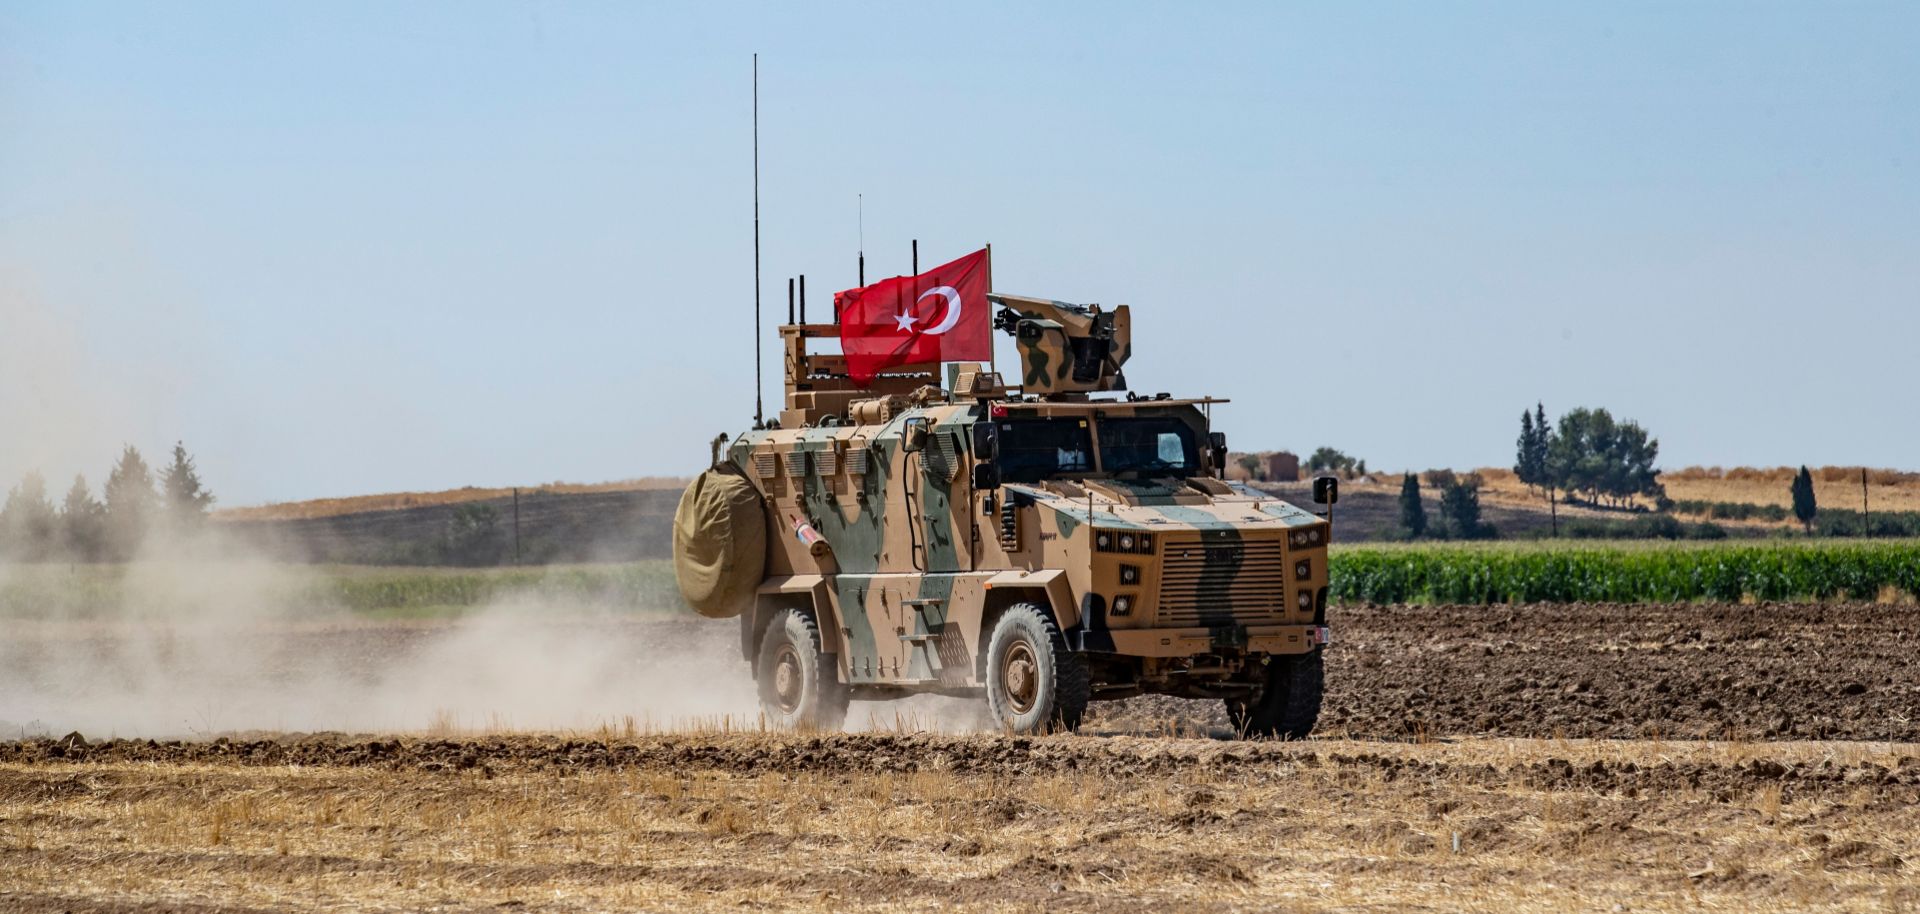 In this photo taken on Sept. 24, 2019, a Turkish military vehicle participates in a joint patrol with the United States near the Syrian border with Turkey. The joint patrols were aimed at easing tensions between Turkey and U.S.-backed Kurdish forces.